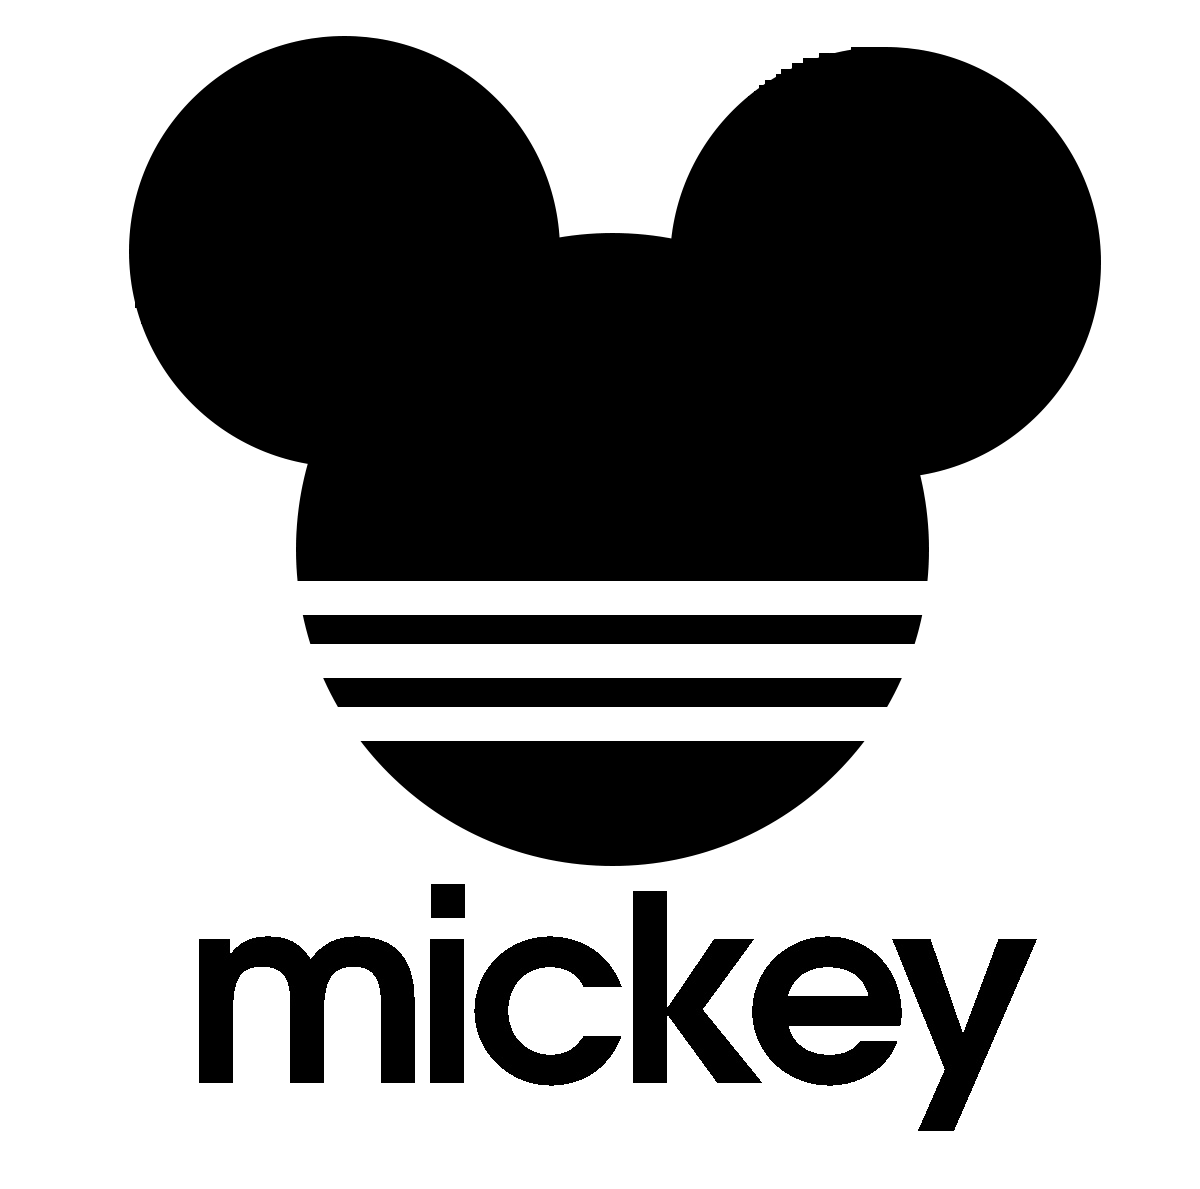 Micky Mouse Logo - Mickey Mouse Logo Png (101+ images in Collection) Page 3